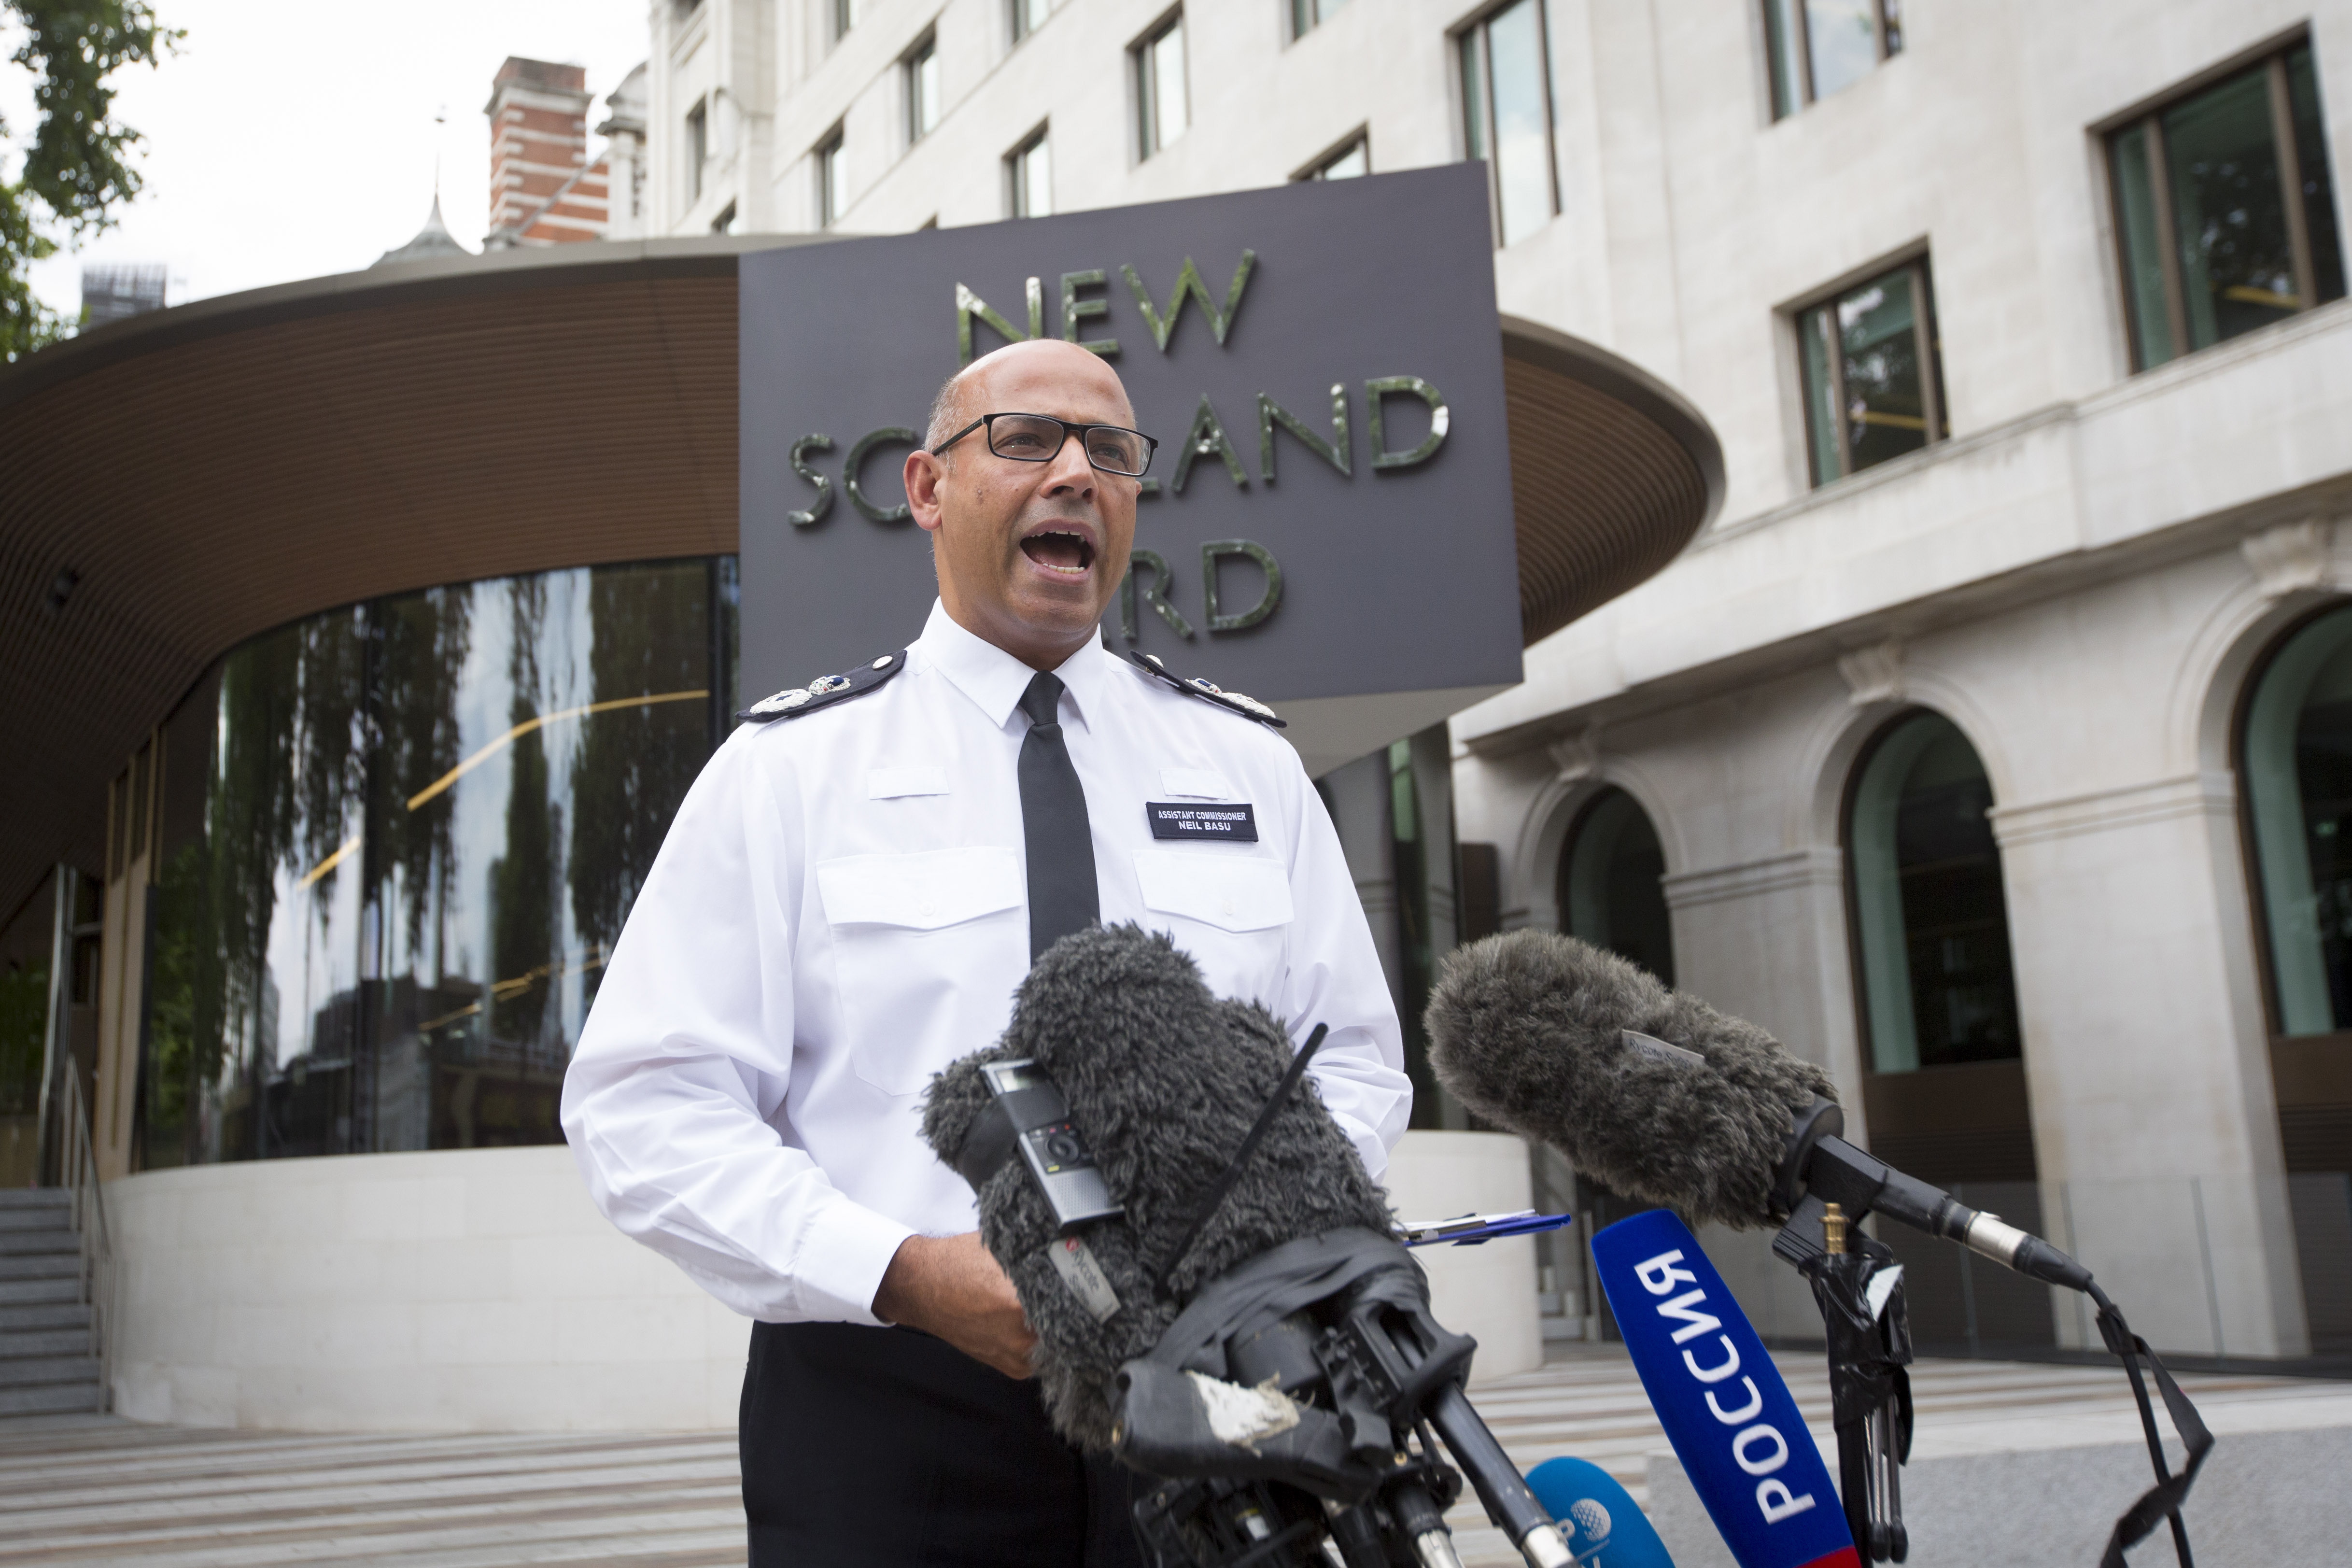 epa06875203 London Metropolitan Police Service (MPS) Assistant Commissioner of Specialist Operations Neil Basu makes a statement to the press outside of the headquarters of the Metropolitan Police Service, in central London, Britain, 09 July 2018, regarding the recent Novichok poisoning in the Wiltshire area. The MPS reported on 09 July 2018 that Neil Basu said that we have now launched a murder investigation after learning that Dawn Sturgess died in hospital on 08 July 2018. 'Dawn aged 44 years old from Durrington, Wiltshire, leaves behind two grown-up sons; aged 19 and 23; an 11-year-old daughter; and her mother and father. Dawn aged 44, and a man, aged 45, who are both local to the area and are British nationals, were hospitalised on 30 June 2018, following their potential exposure to the nerve agent  Novichok. A number of scenes, believed to be the areas the individuals frequented in the period before they fell ill, remain cordoned off in and around the Amesbury and Salisbury area as a precautionary measure. These include, Queen Elizabeth Gardens in Salisbury. A property at John Baker House, Rolleston Street, Salisbury. A property on Muggleton Road, Amesbury. Boots the Chemist, Stonehenge Walk, Amesbury. Amesbury Baptist Centre on Butterfield Drive, Amesbury. The Defence Science and Technology Laboratory at Porton Down confirmed to police that the man and woman had been exposed to the nerve agent  Novichok. At present, British Counter Terrorism Policing Network, investigations are unable to say whether or not the nerve agent found in this incident is linked to the attack on Sergei and Yulia Skripal. However, this remains our main line of enquiry.  EPA/RICK FINDLER